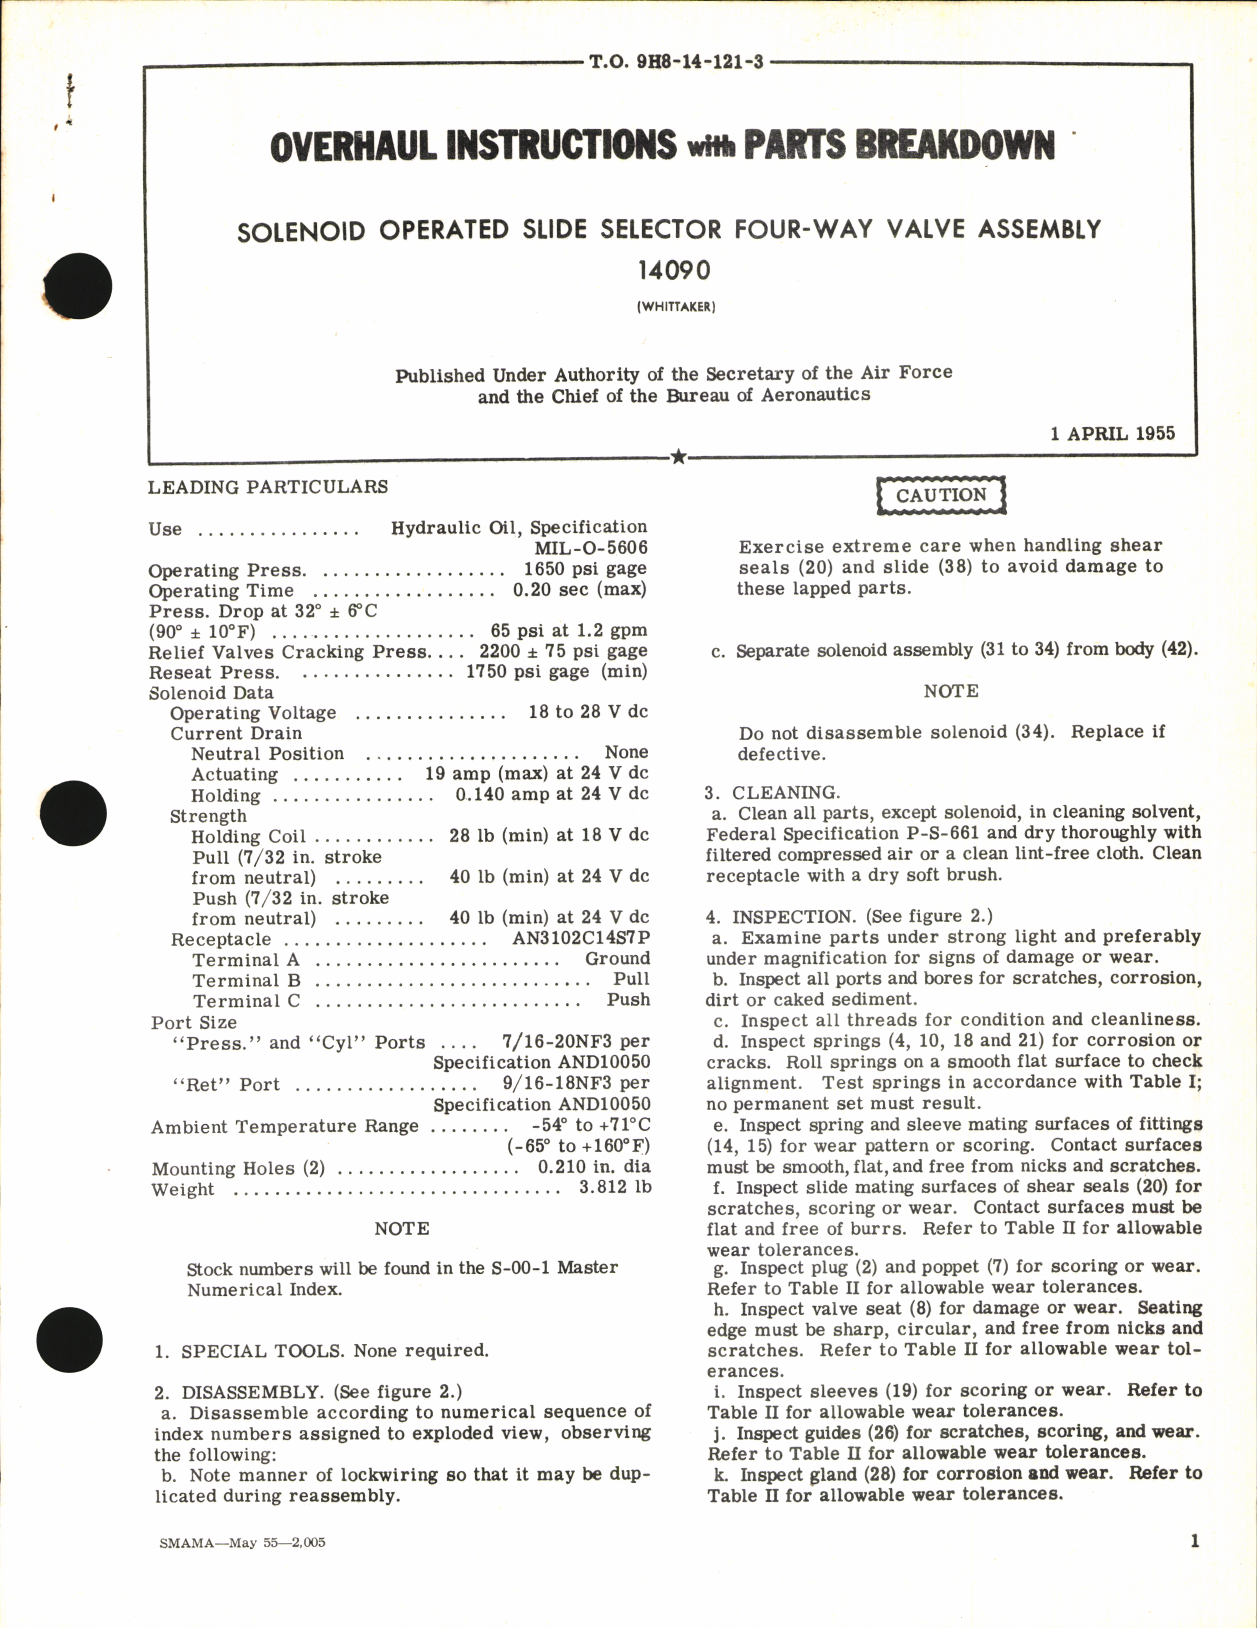 Sample page 1 from AirCorps Library document: Overhaul Instructions with Parts Breakdown for Solenoid Operated Slide Selector Four-Way Valve Assembly 14090